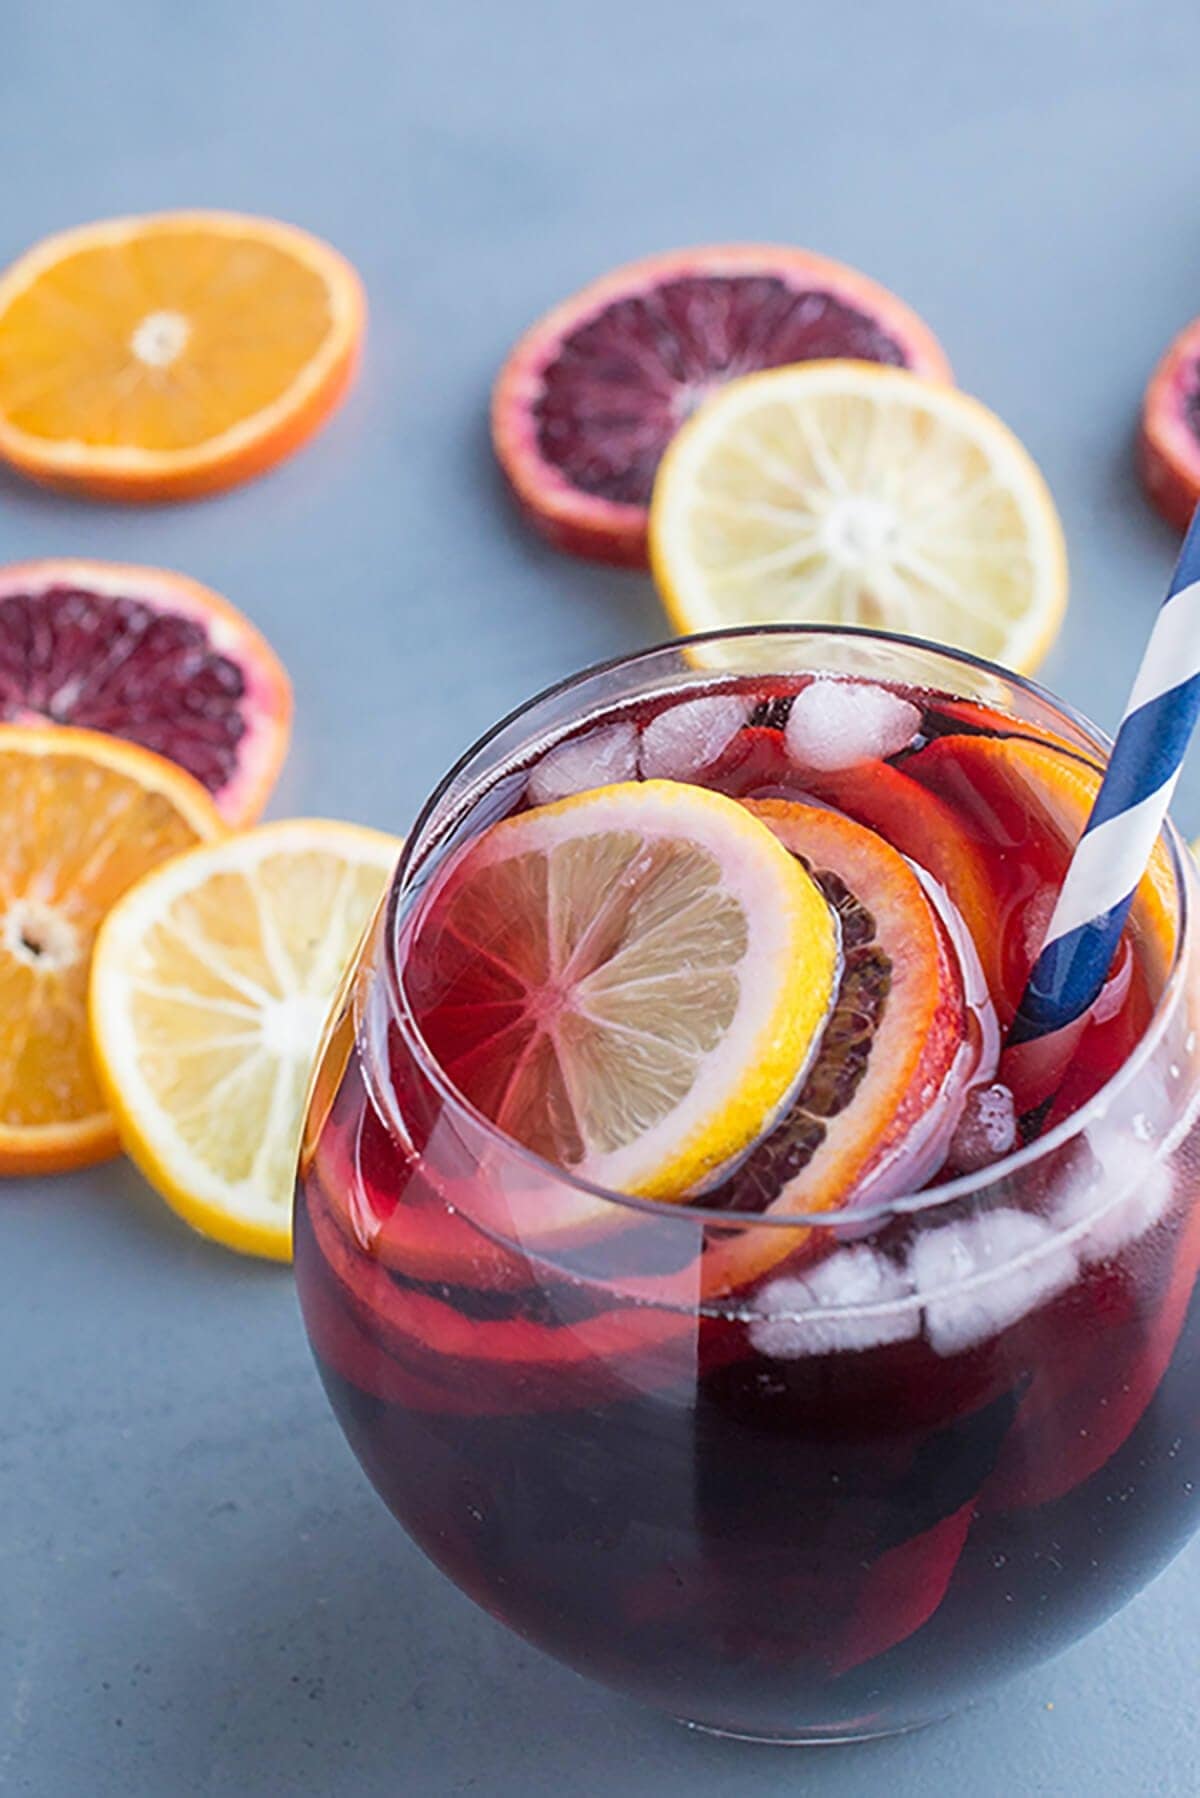 Iced red sangria on glass garnish with navel oranges and lemon slices.